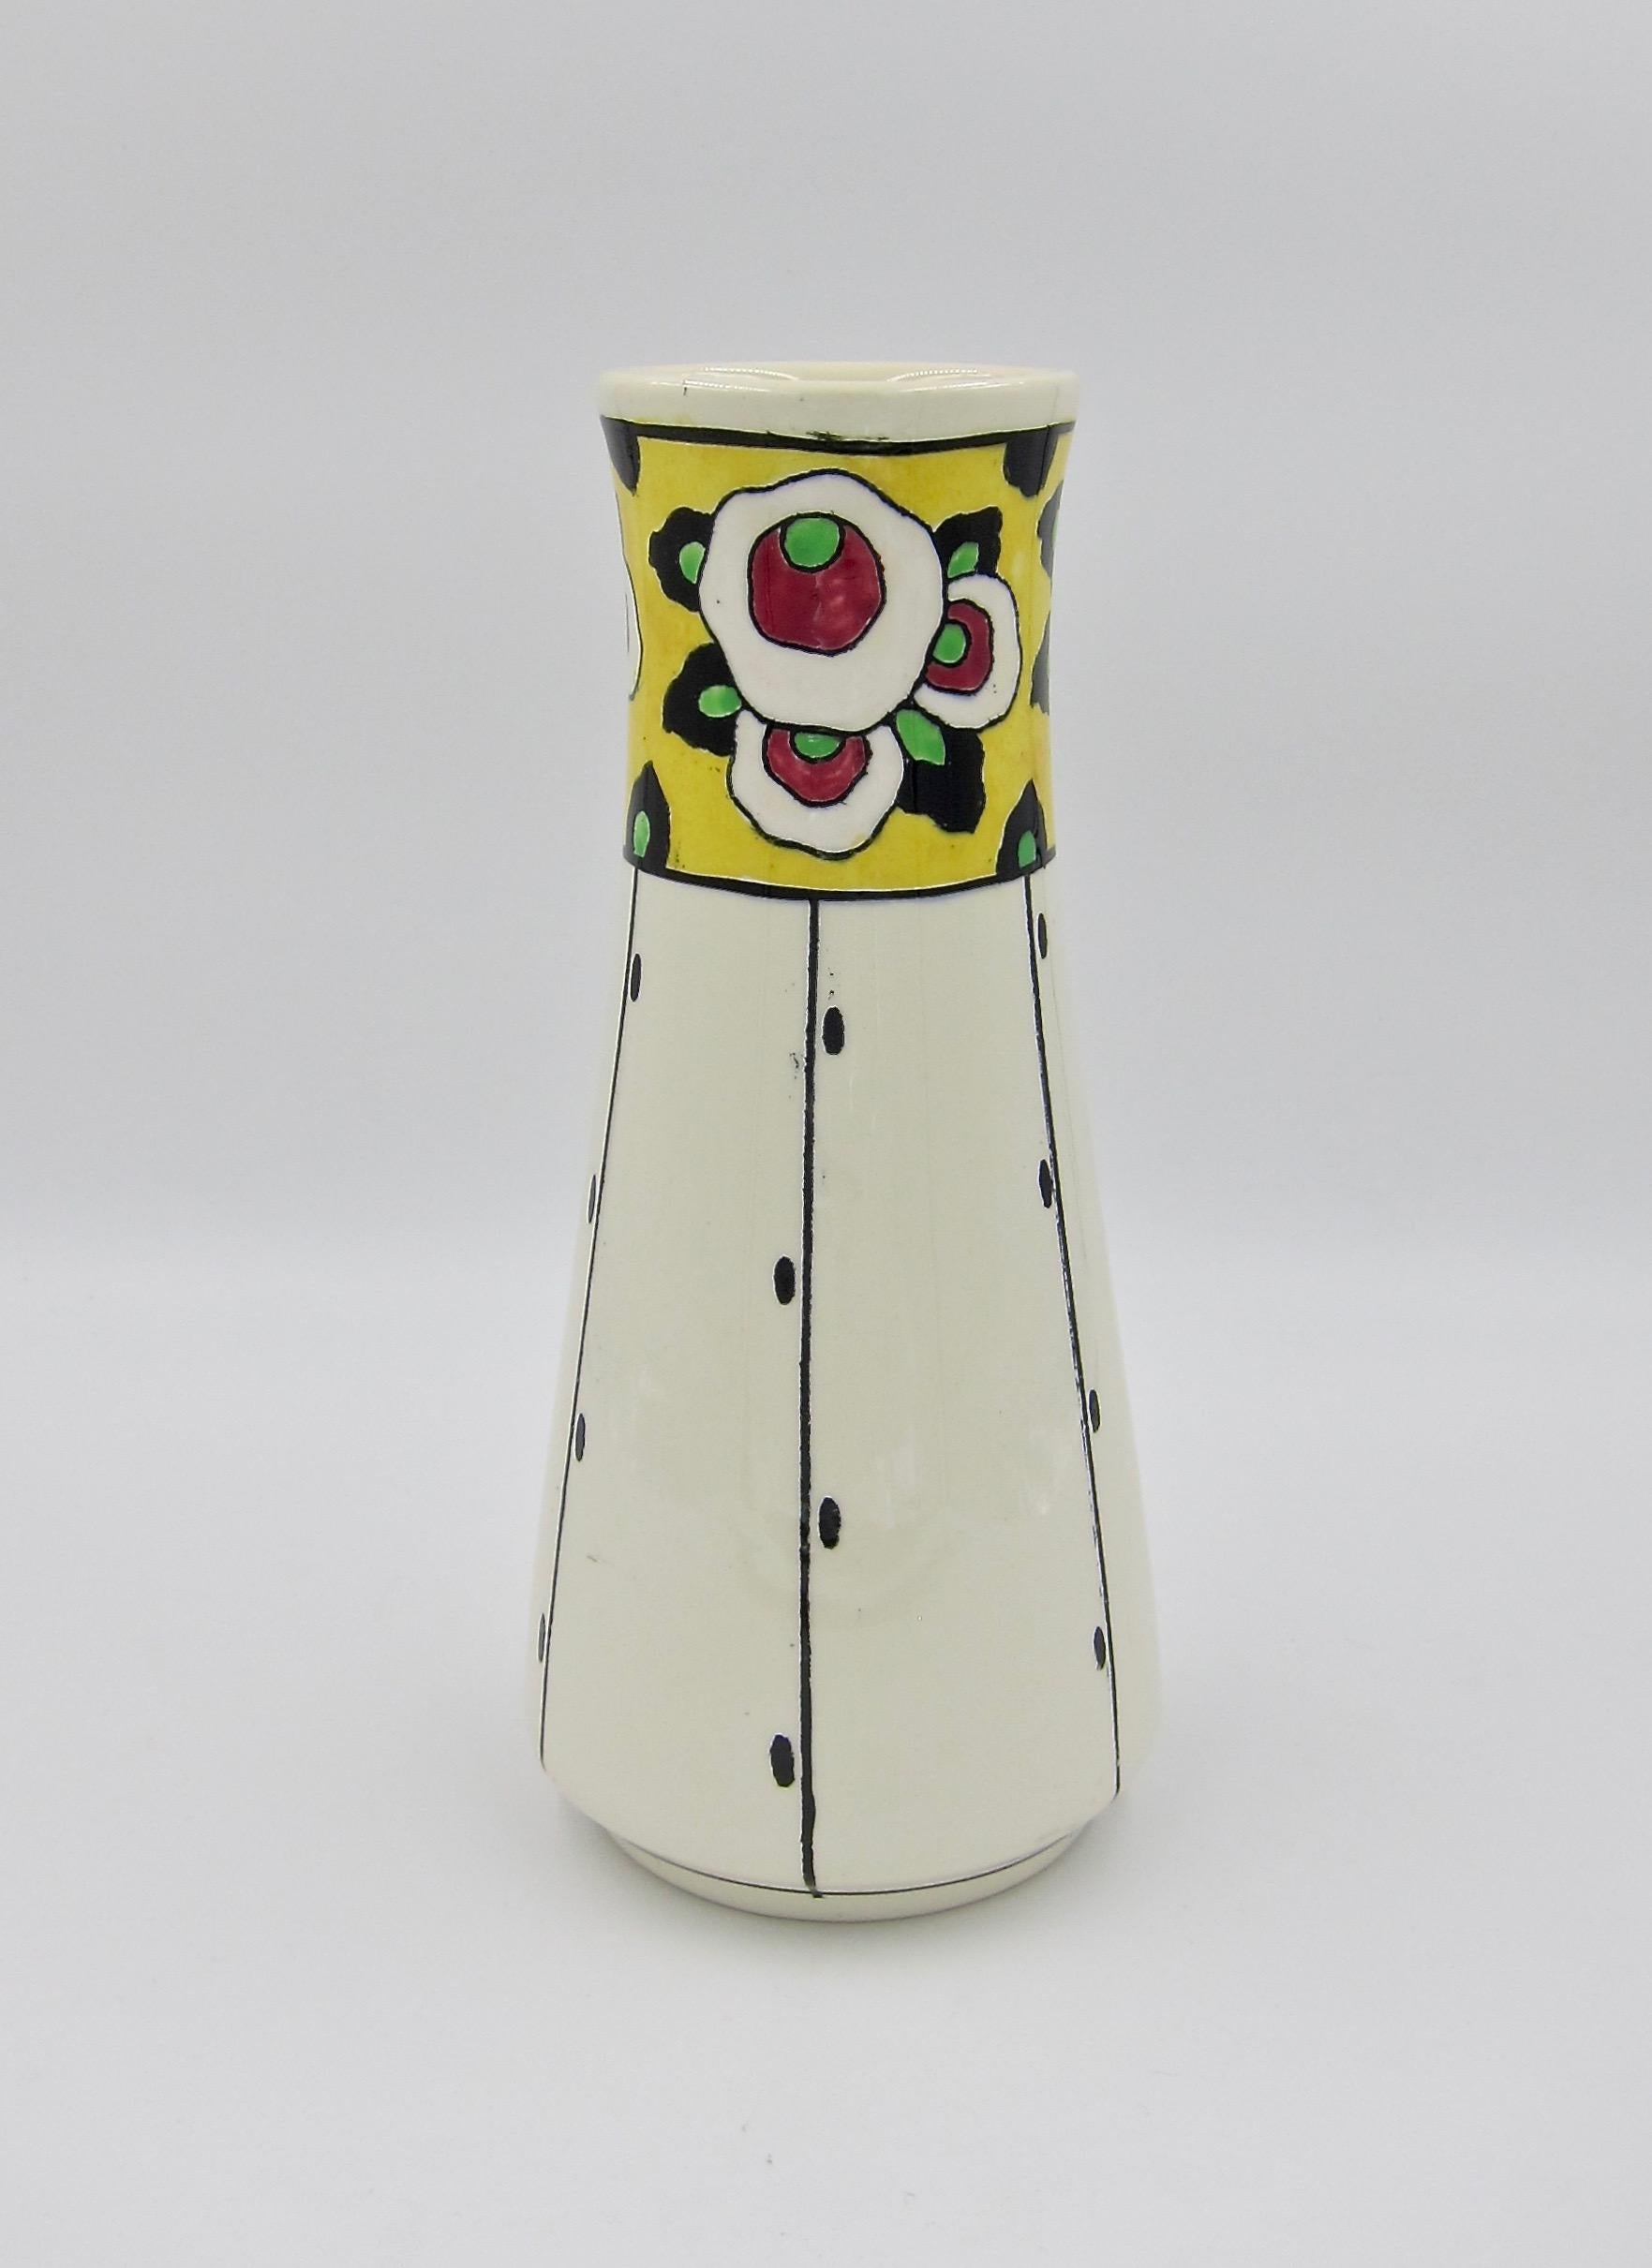 A colorful Art Deco vase produced by Boch Freres, Charles Catteau's l'Atelier de Fantaisie art pottery workshop, at La Louvière, Belgium, circa 1923. 

Boch Freres produced a notable range of bold and colorful ceramics during the Art Deco period,